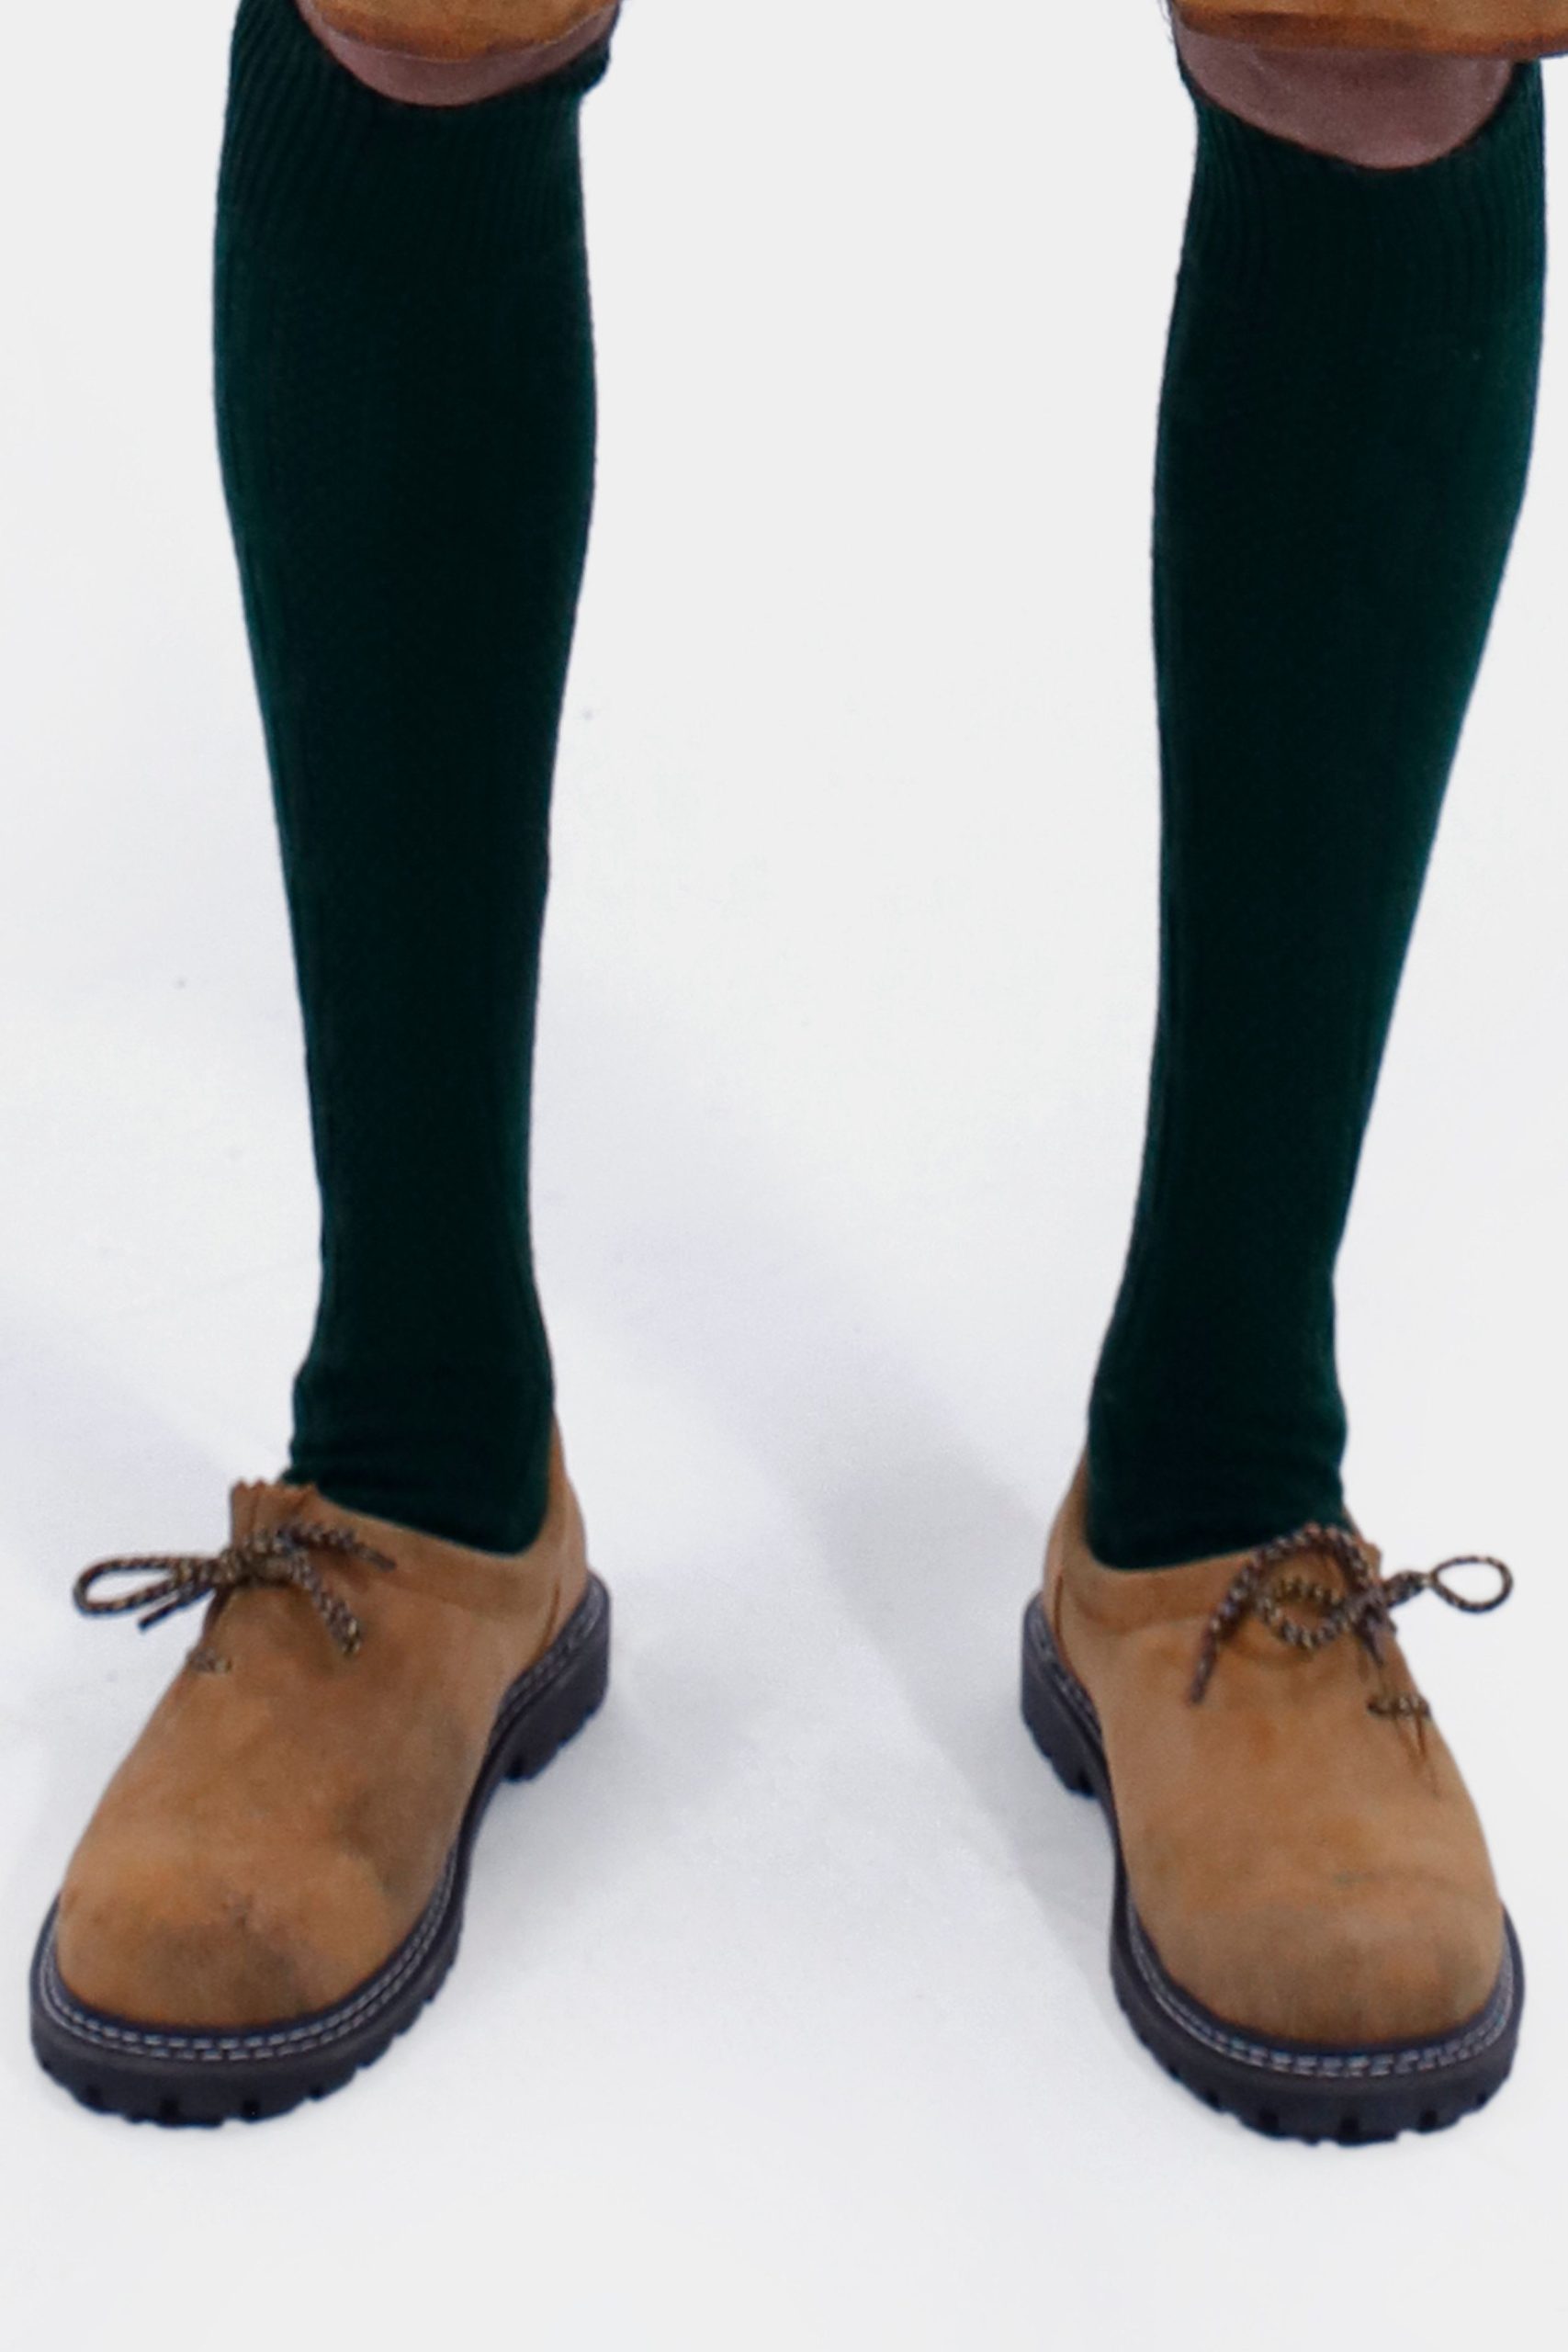 Leory Lederhosen Shoes in tan brown, featuring a robust design with two-tone laces. The shoes are shown paired with green knee-high socks, showcasing their traditional Bavarian style and versatility.